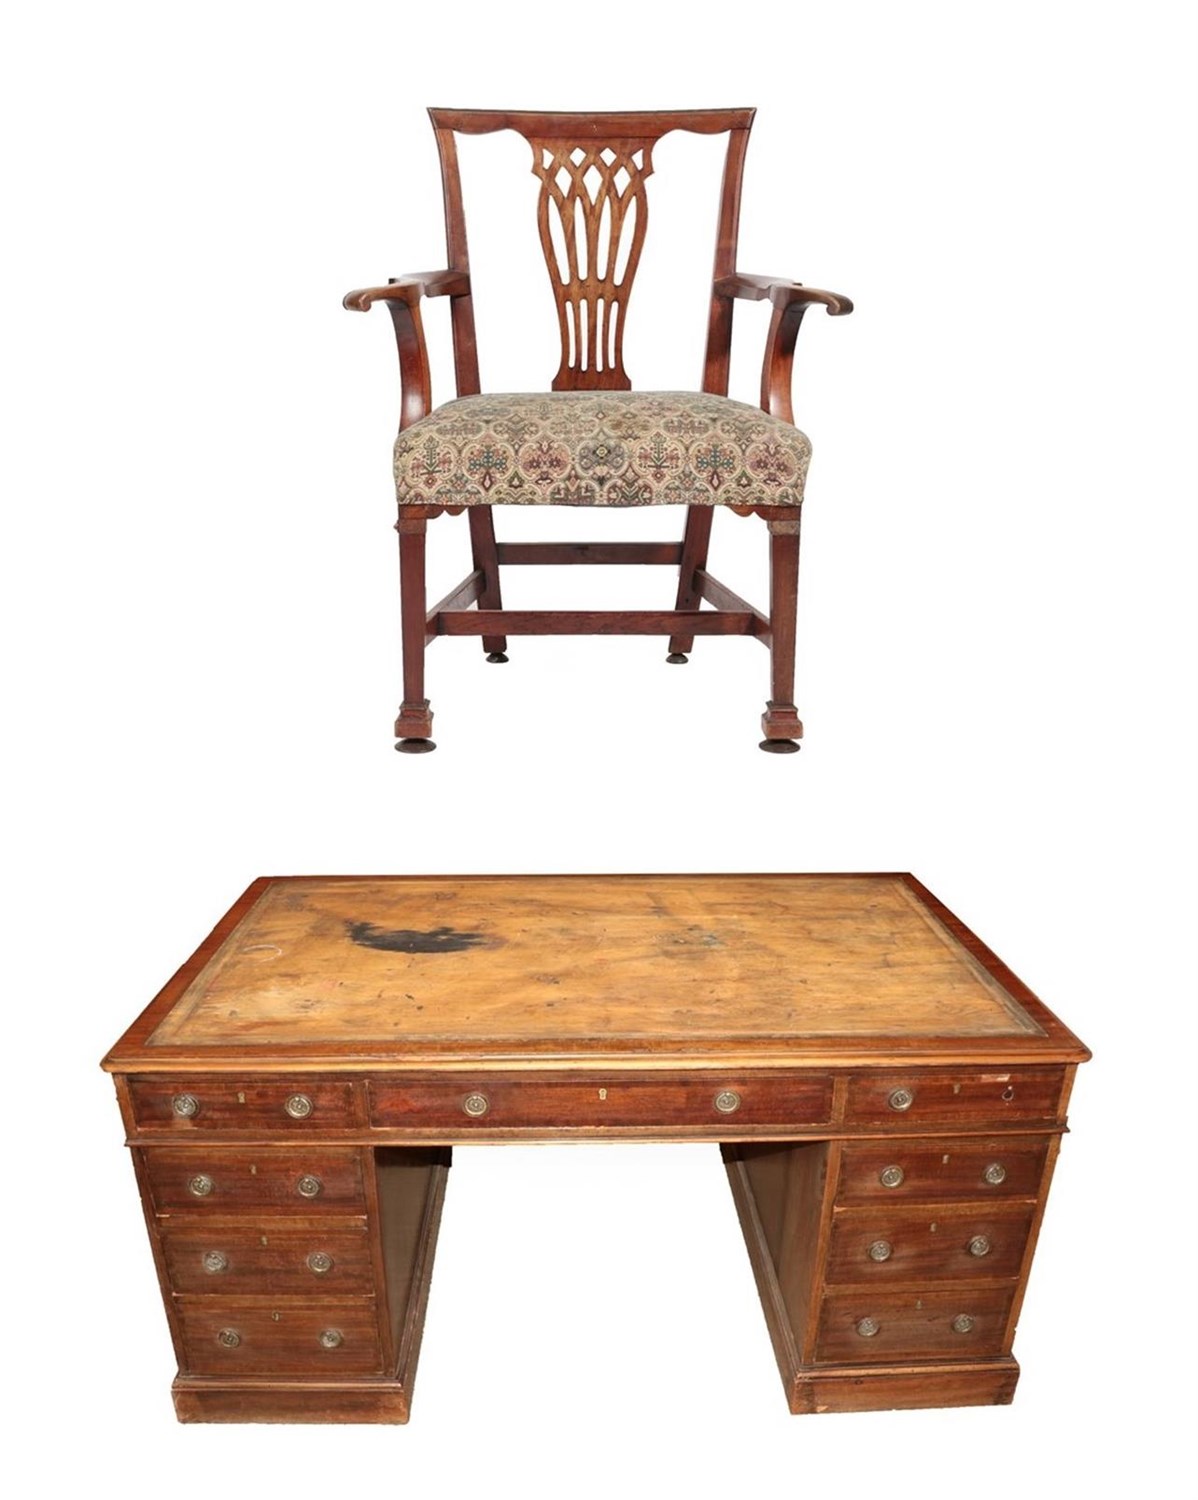 Lot 575 - ~ A Victorian Mahogany and Crossbanded Partners' Desk, mid 19th century, with baize writing surface